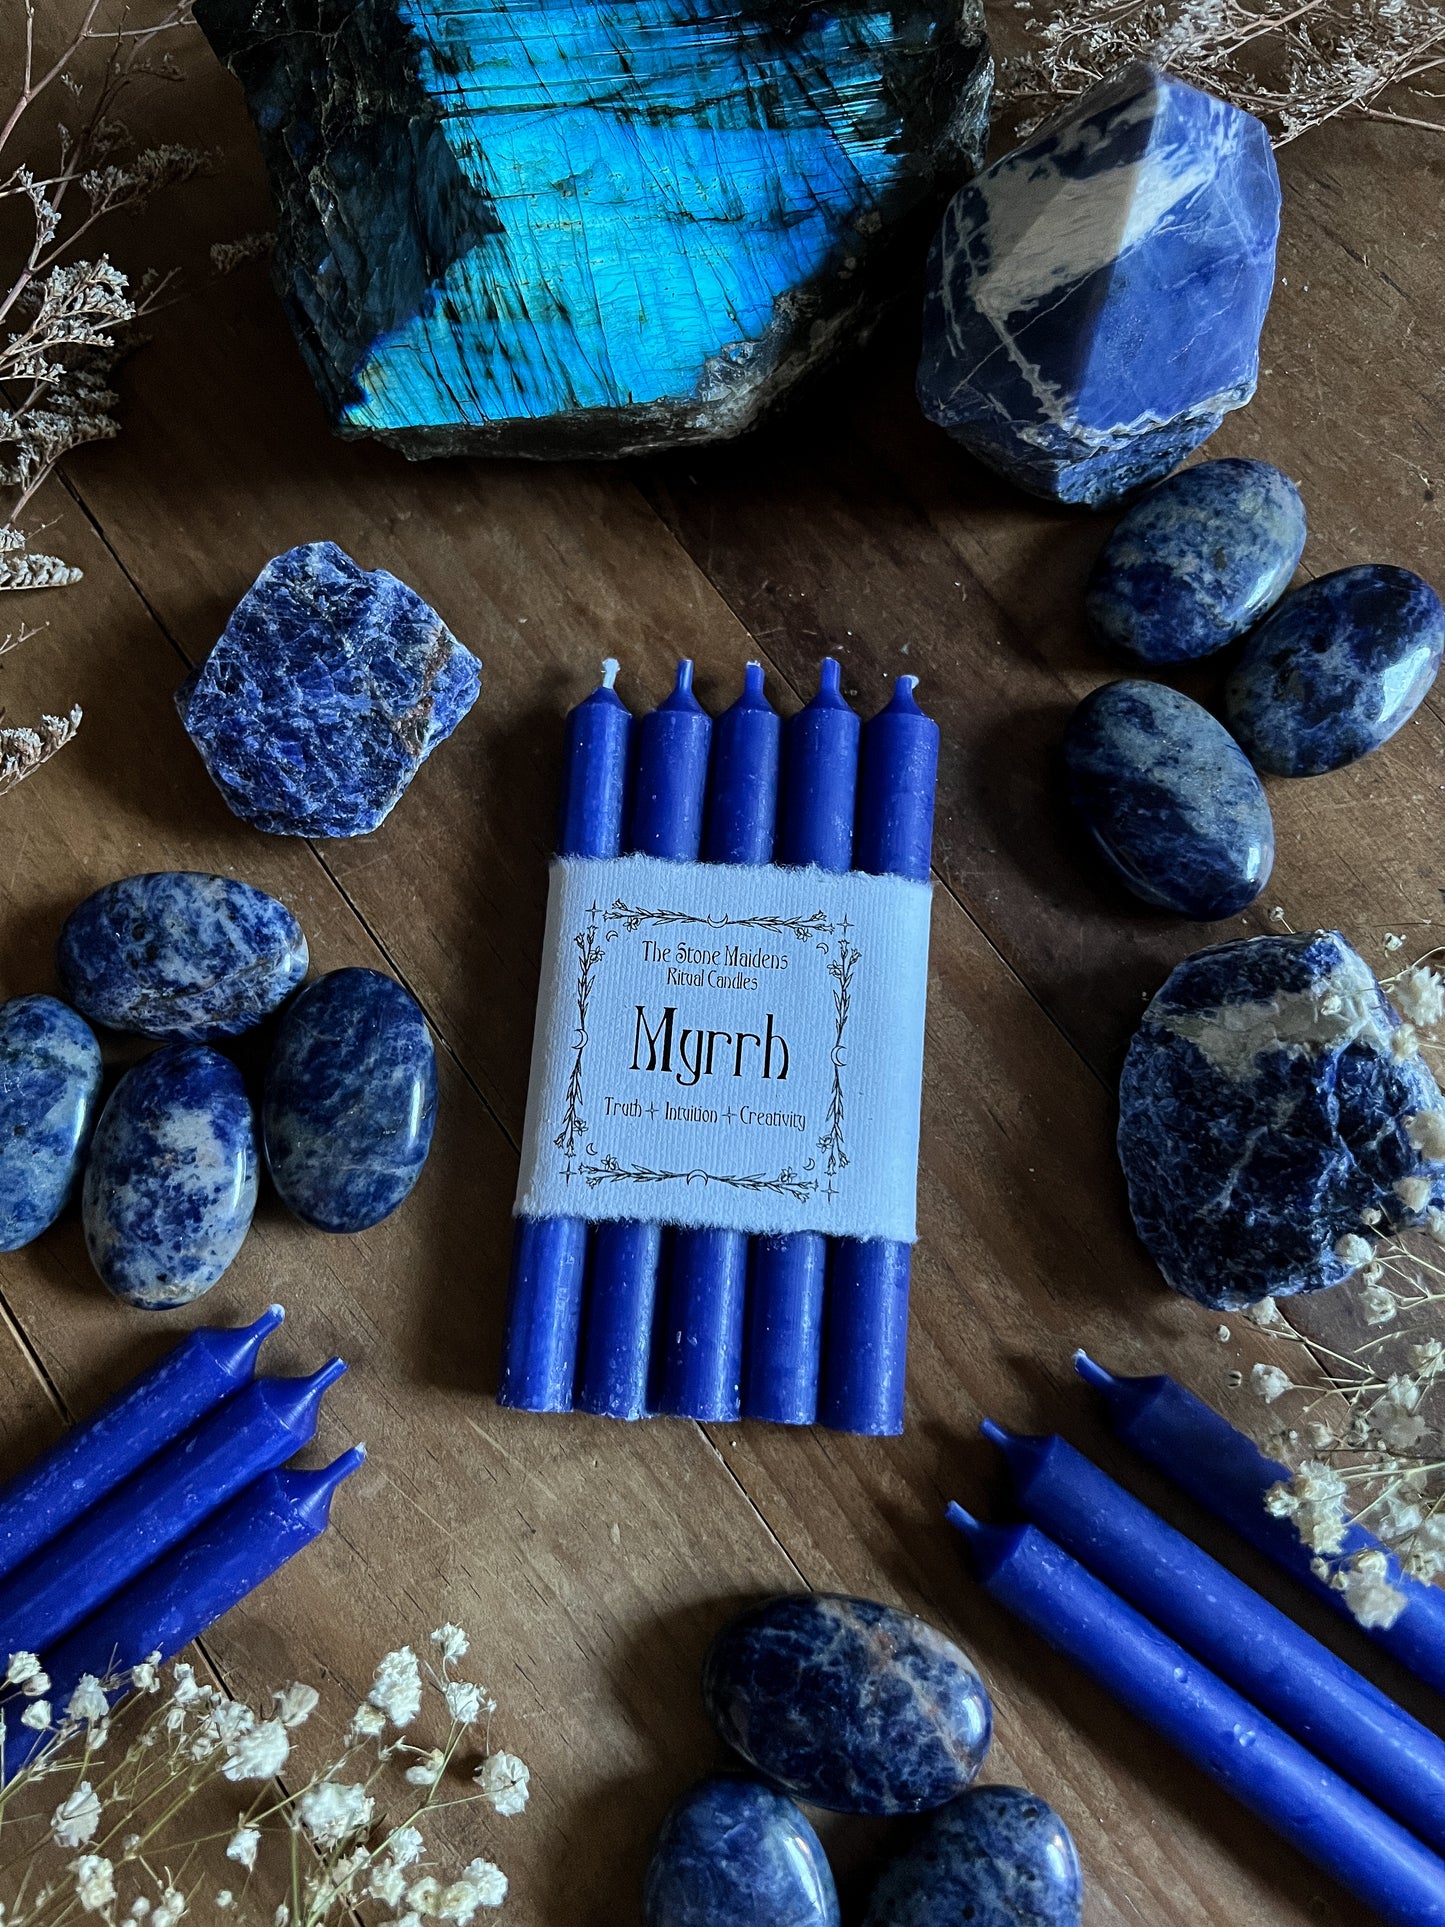 Blue Myrrh Chime candles arranged on a dark wooden altar surrounded by crystals, sold at The Stone Maidens